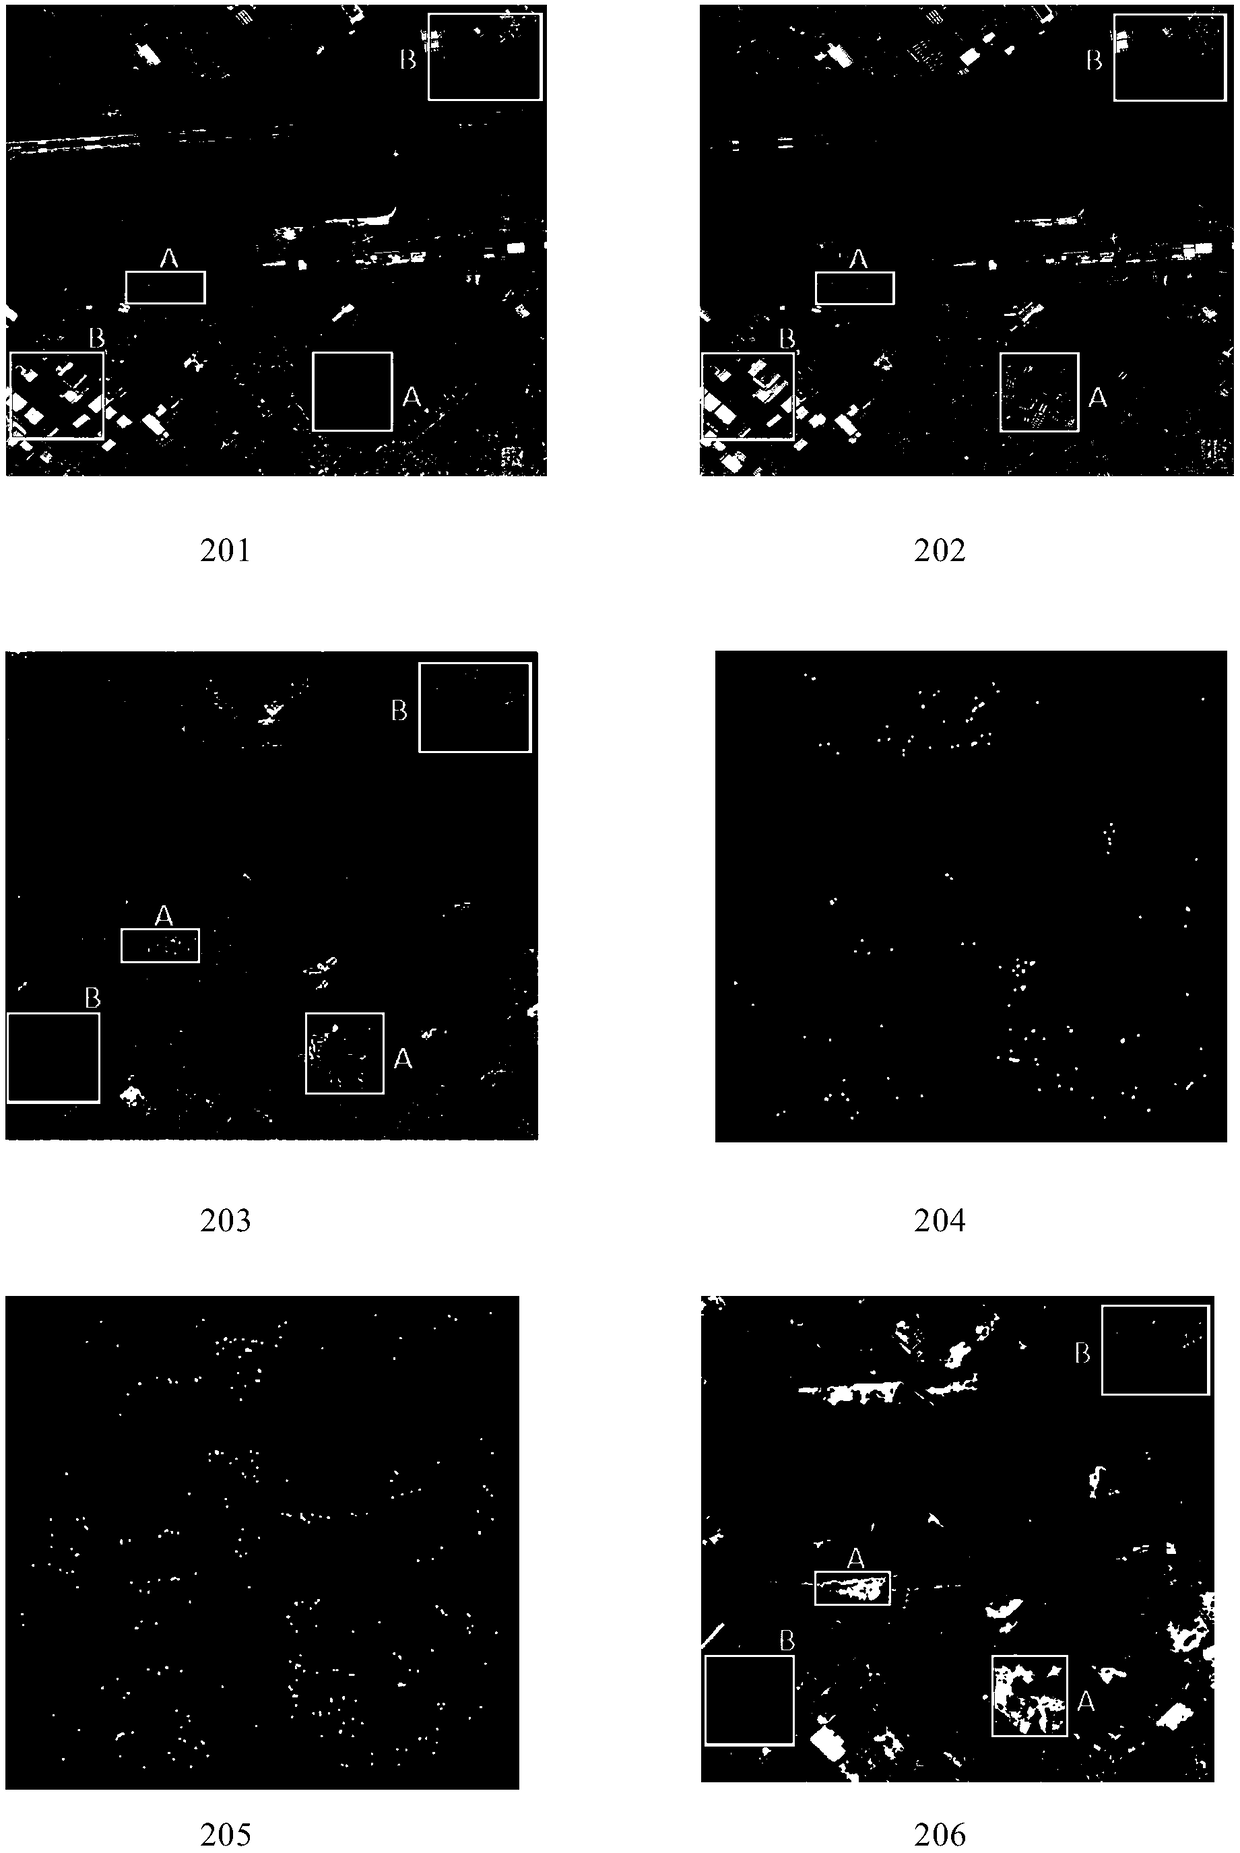 A Fully Supervised Classification Method of Remote Sensing Images Based on SIFT Training Sample Extraction